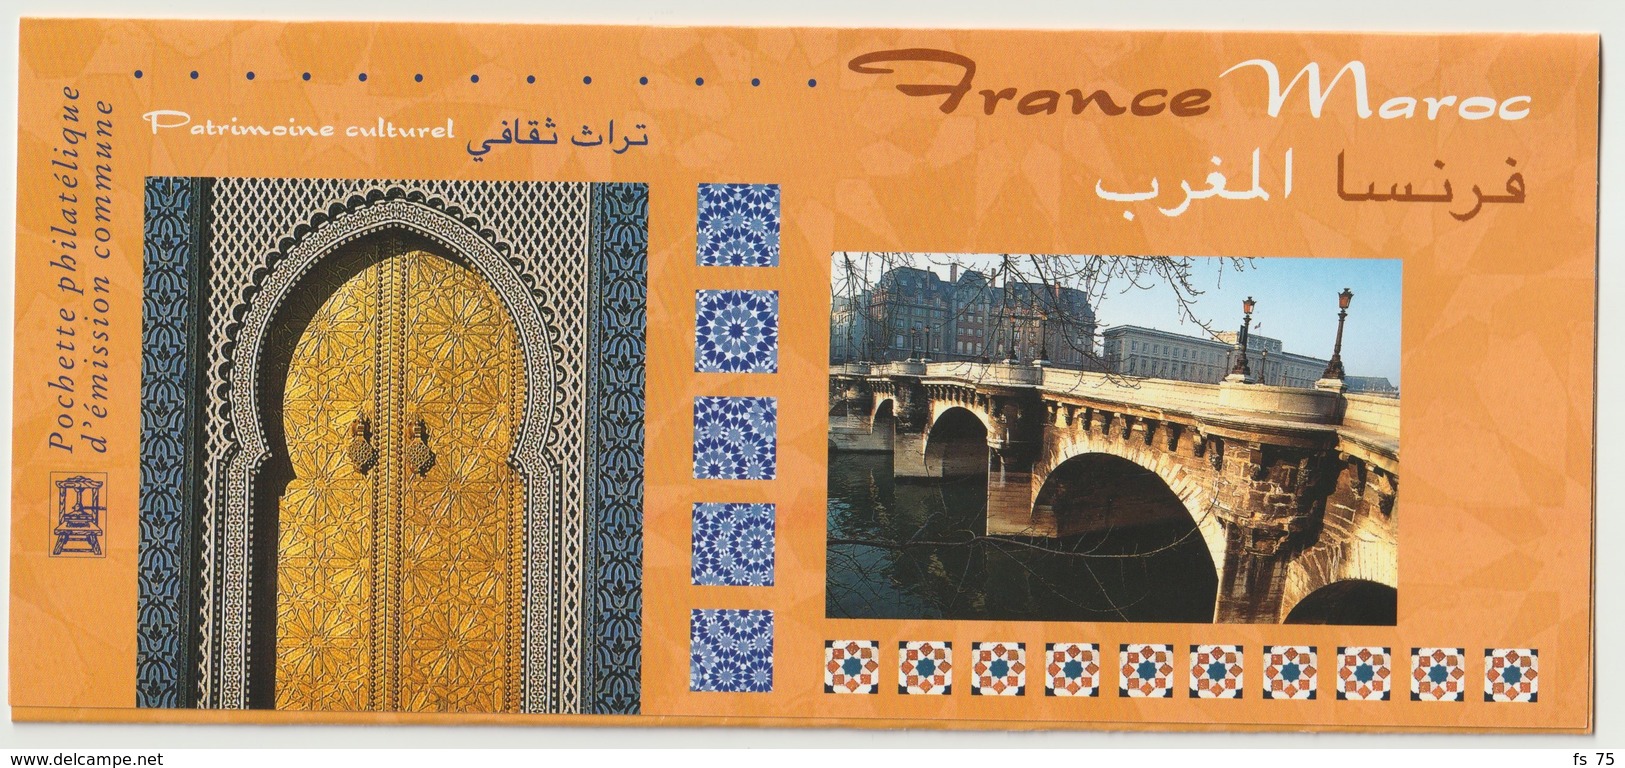 EMISSIONS COMMUNES - FRANCE / MAROC  - FONTAINES 2001  - 2 POCHETTES SOUS BLISTER OUVERT - Joint Issues